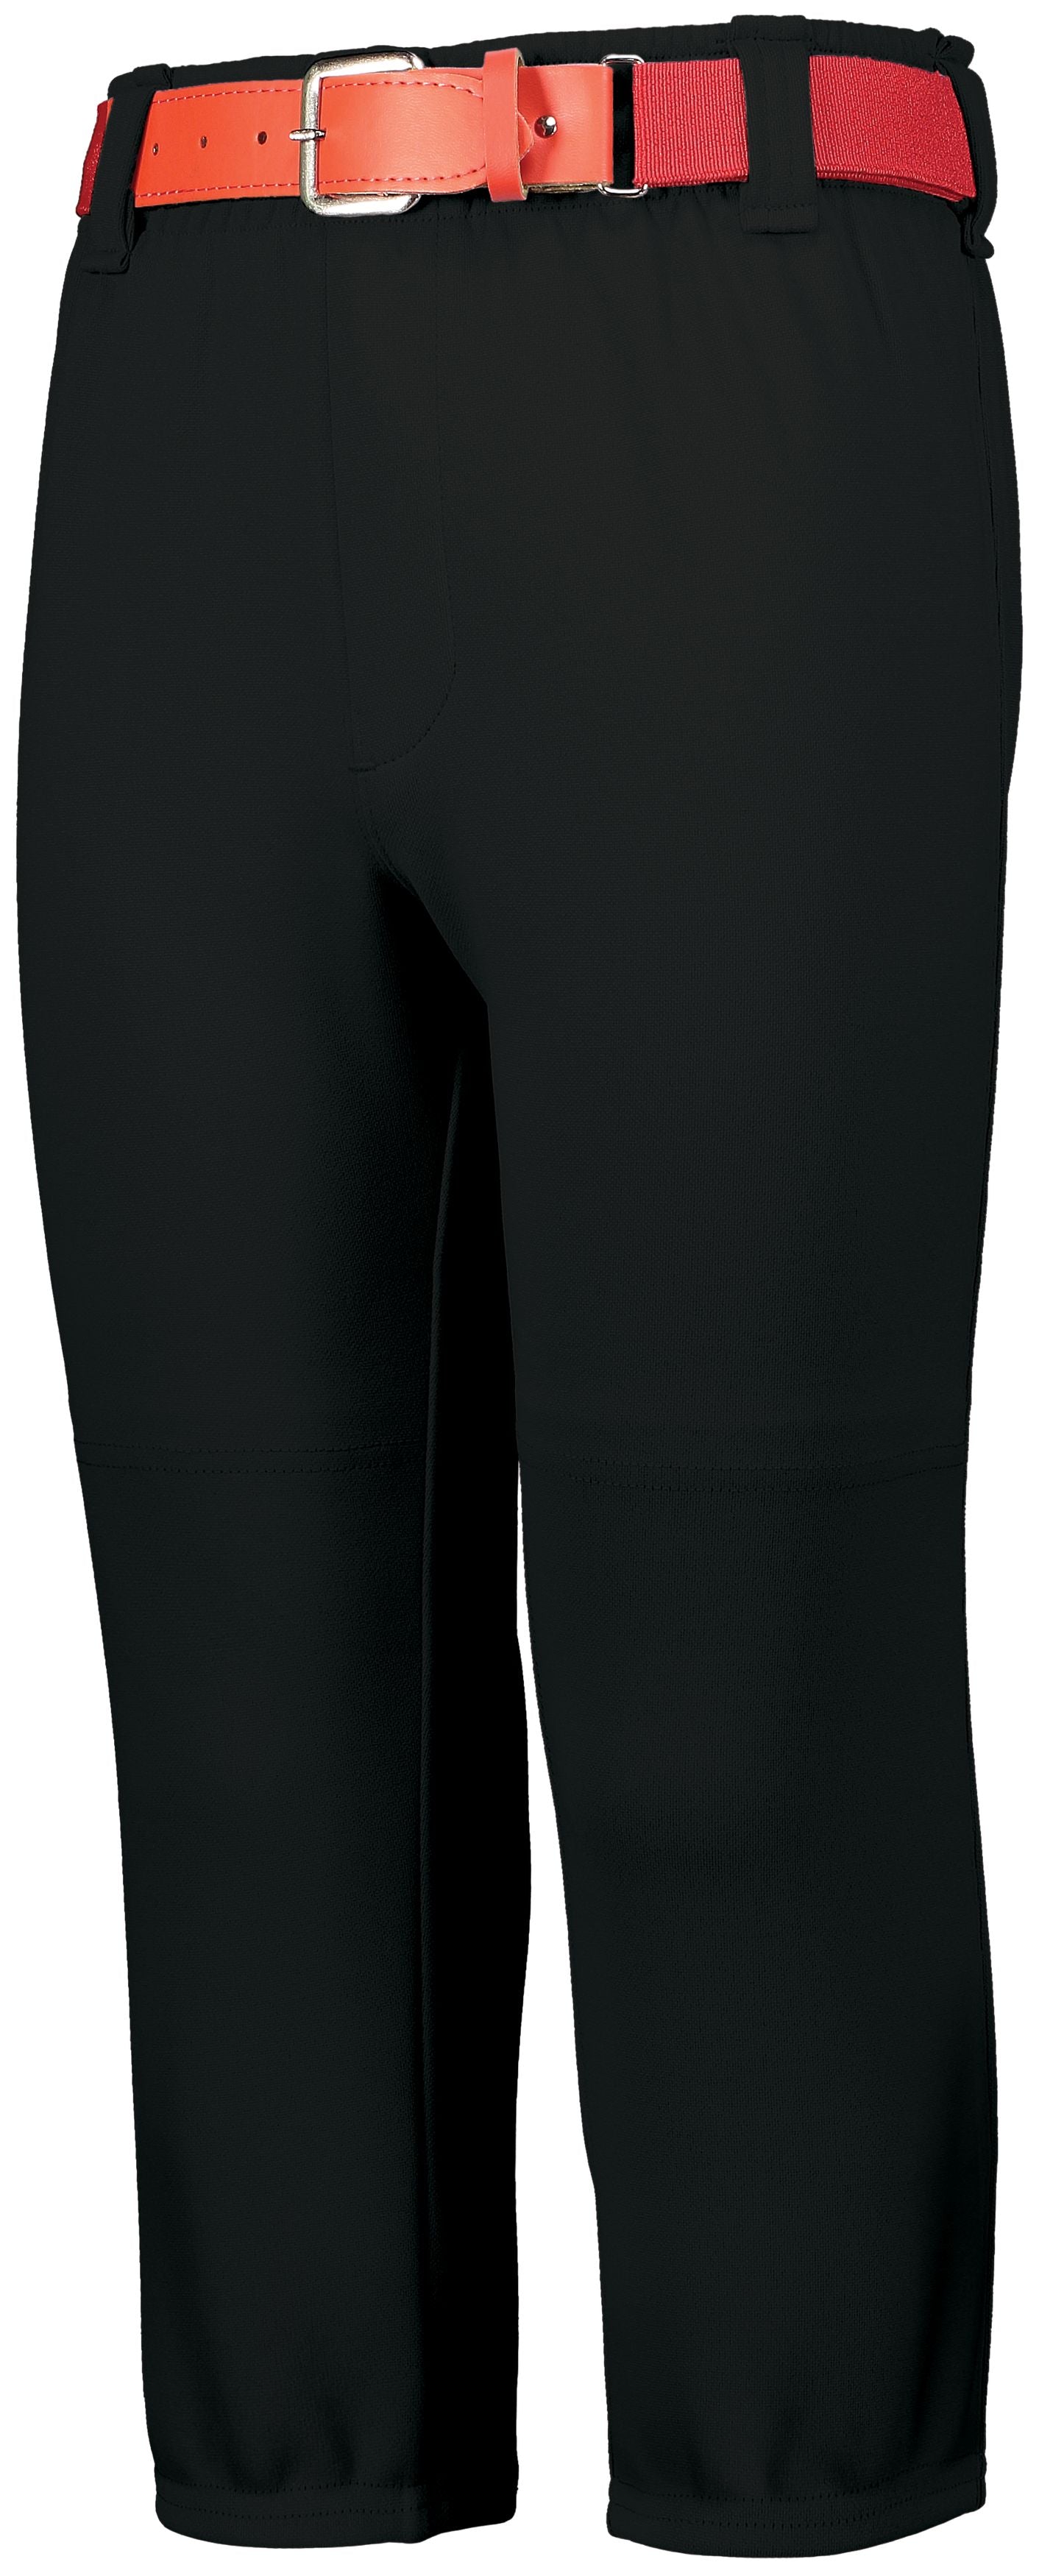 YOUTH GAMER PULL-UP BASEBALL PANT WITH LOOPS Augusta 6851